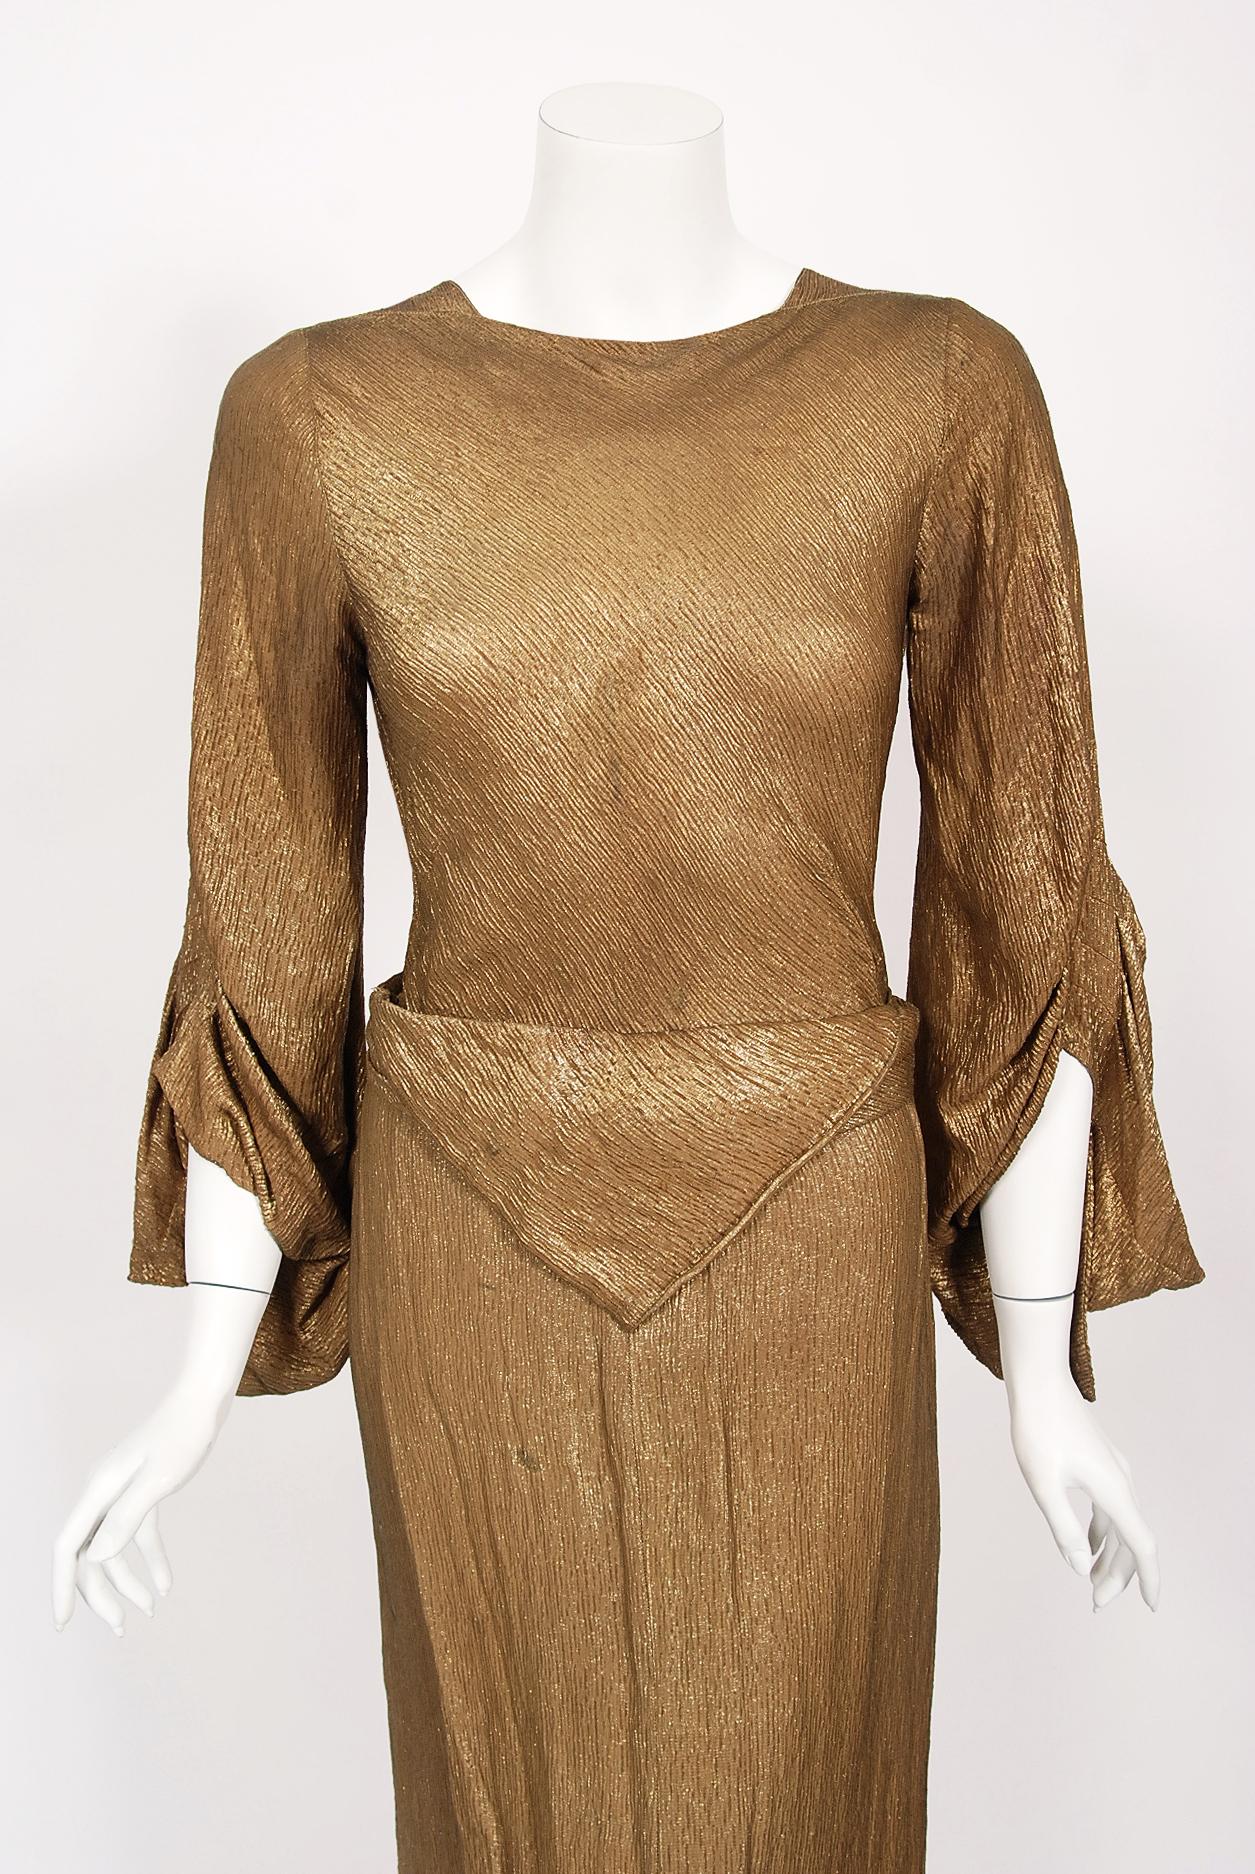 A truly breathtaking and luxurious mid 1930's metallic gold shimmer lamé bias cut gown from the high-end London department store Debenham & Freebody. This special department store became the first of over 60 nationwide. In 1935 Debenham and Freebody